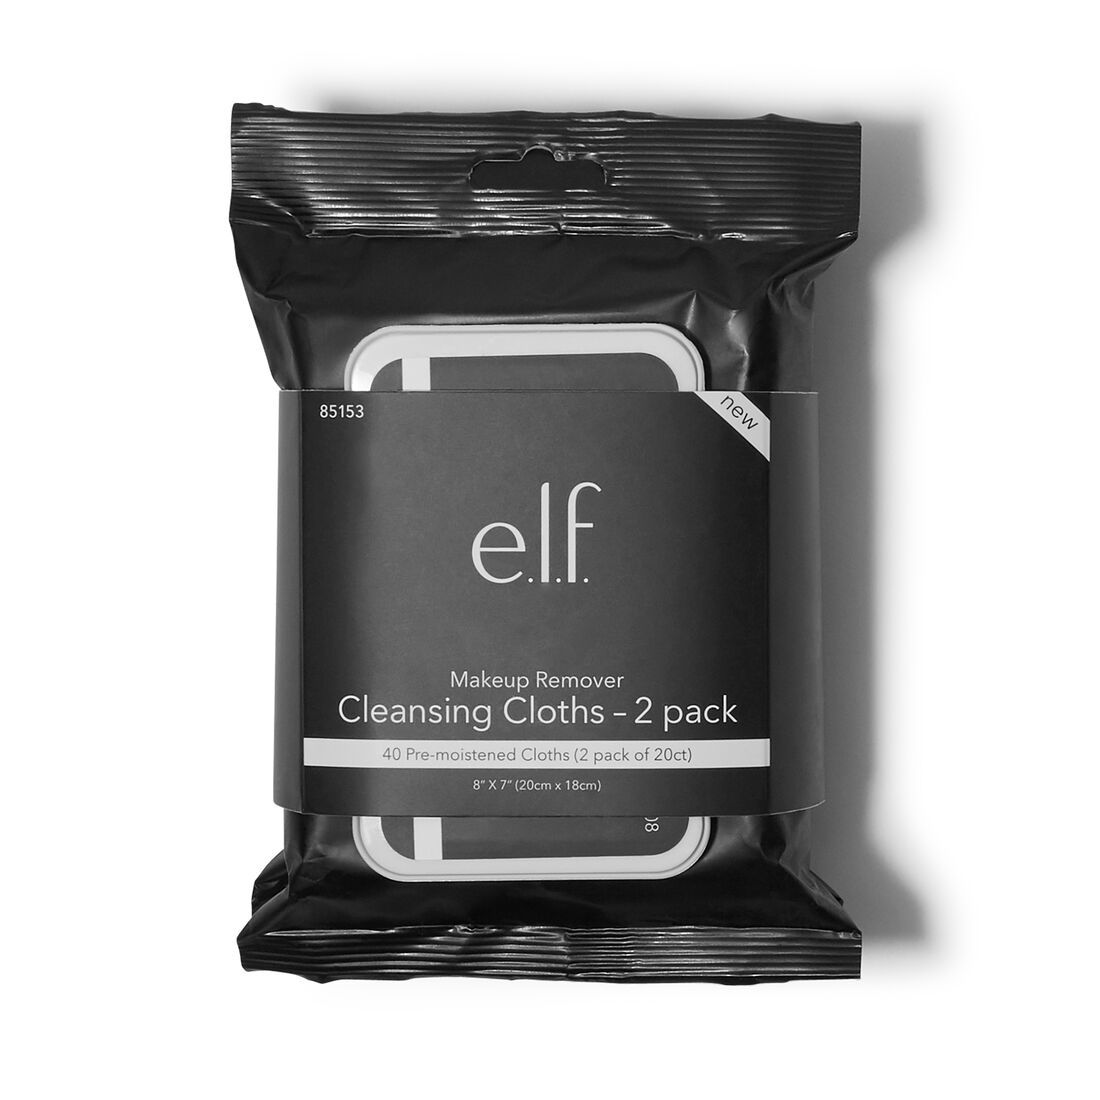 Makeup Remover Cleansing Cloths - 2 Pack | e.l.f. cosmetics (US)